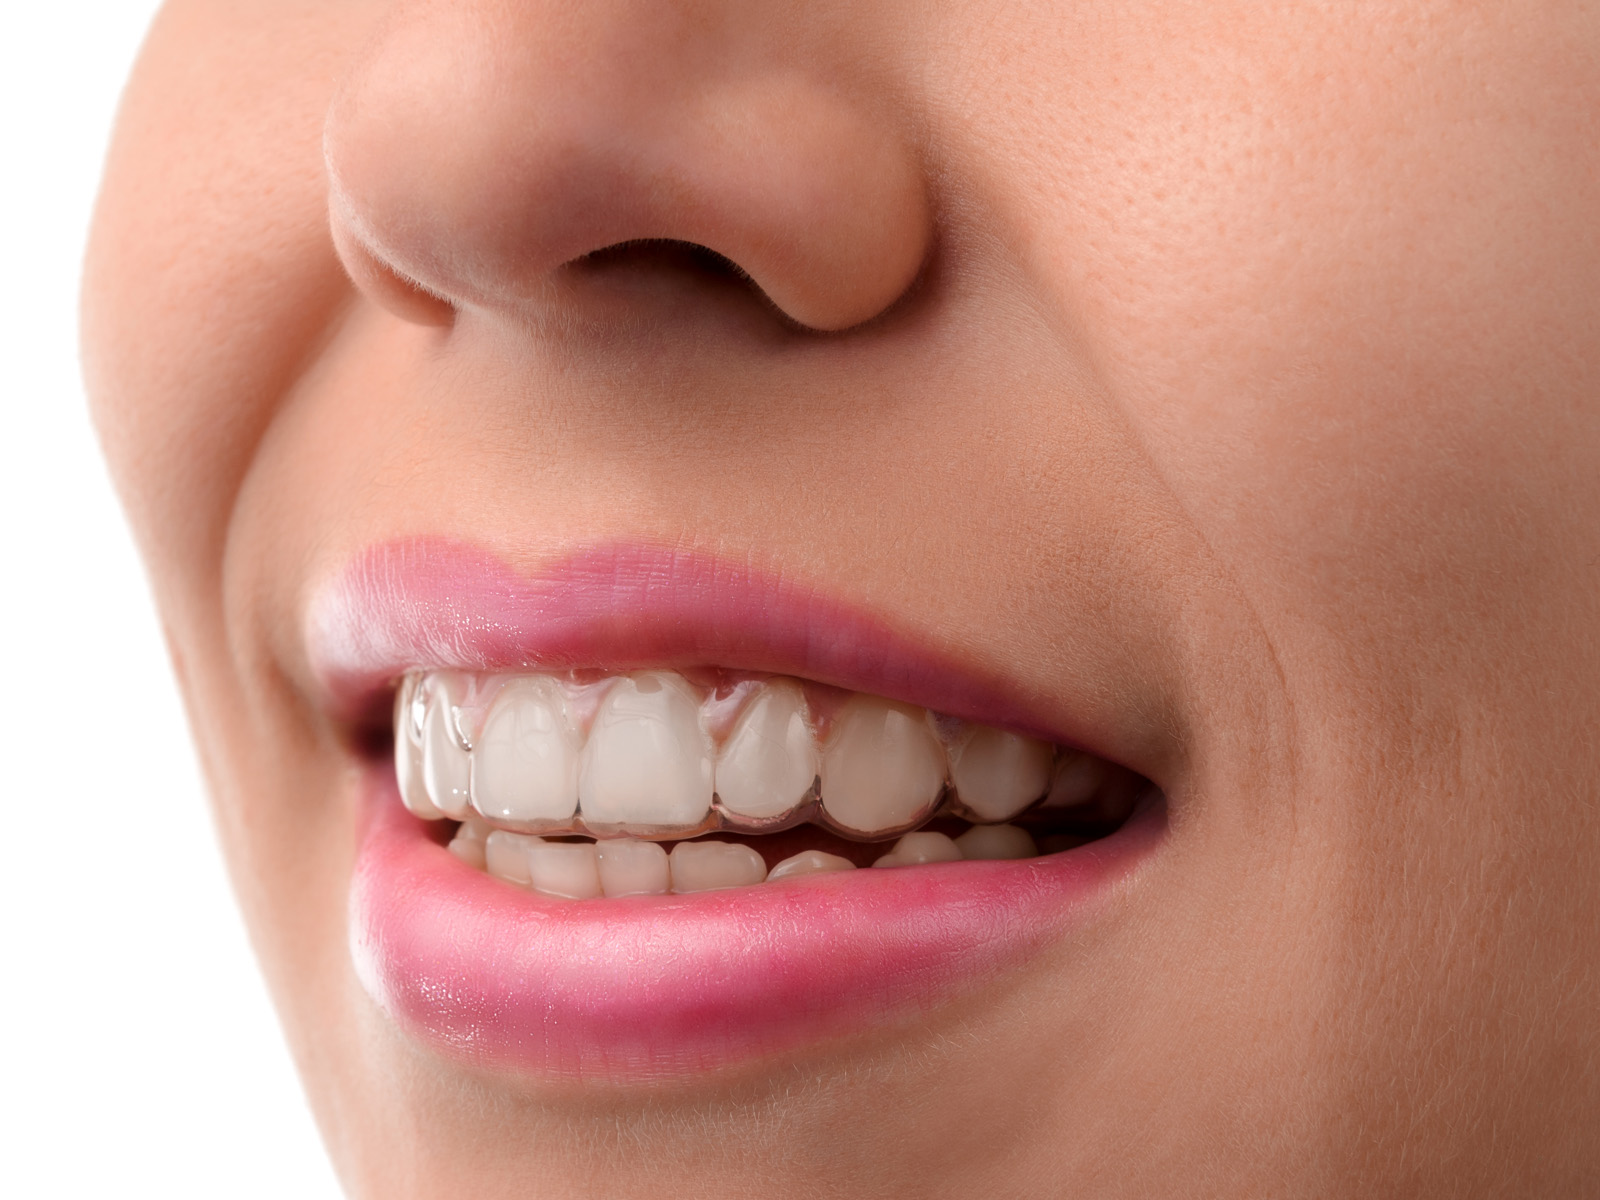 Does Invisalign make your teeth yellow?